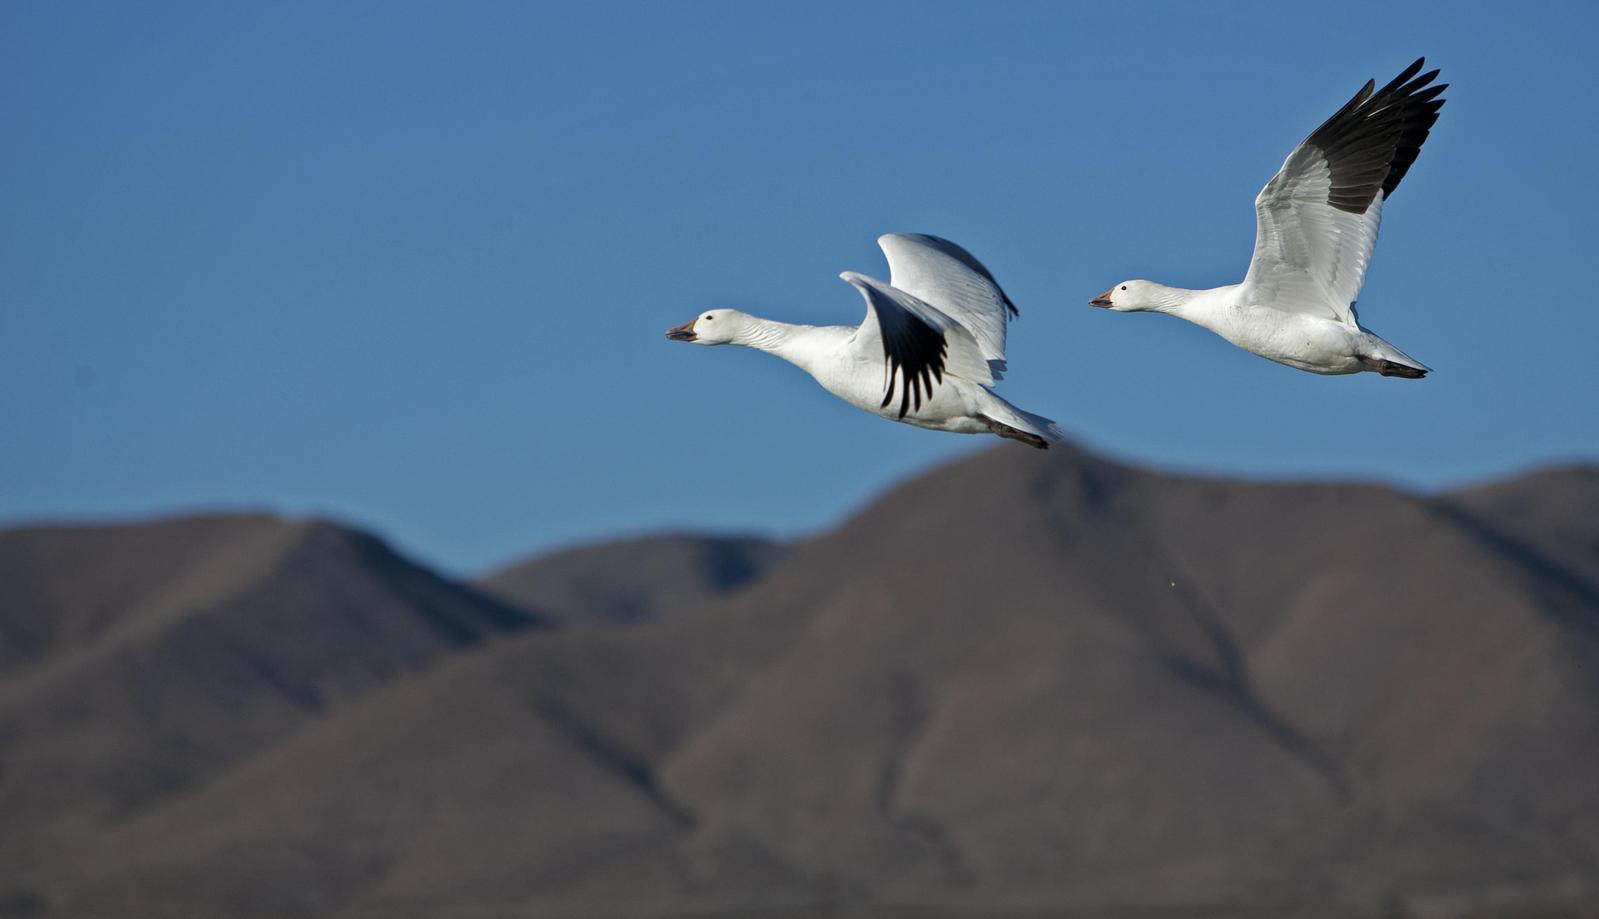 Snow Goose Photo by dominic hall